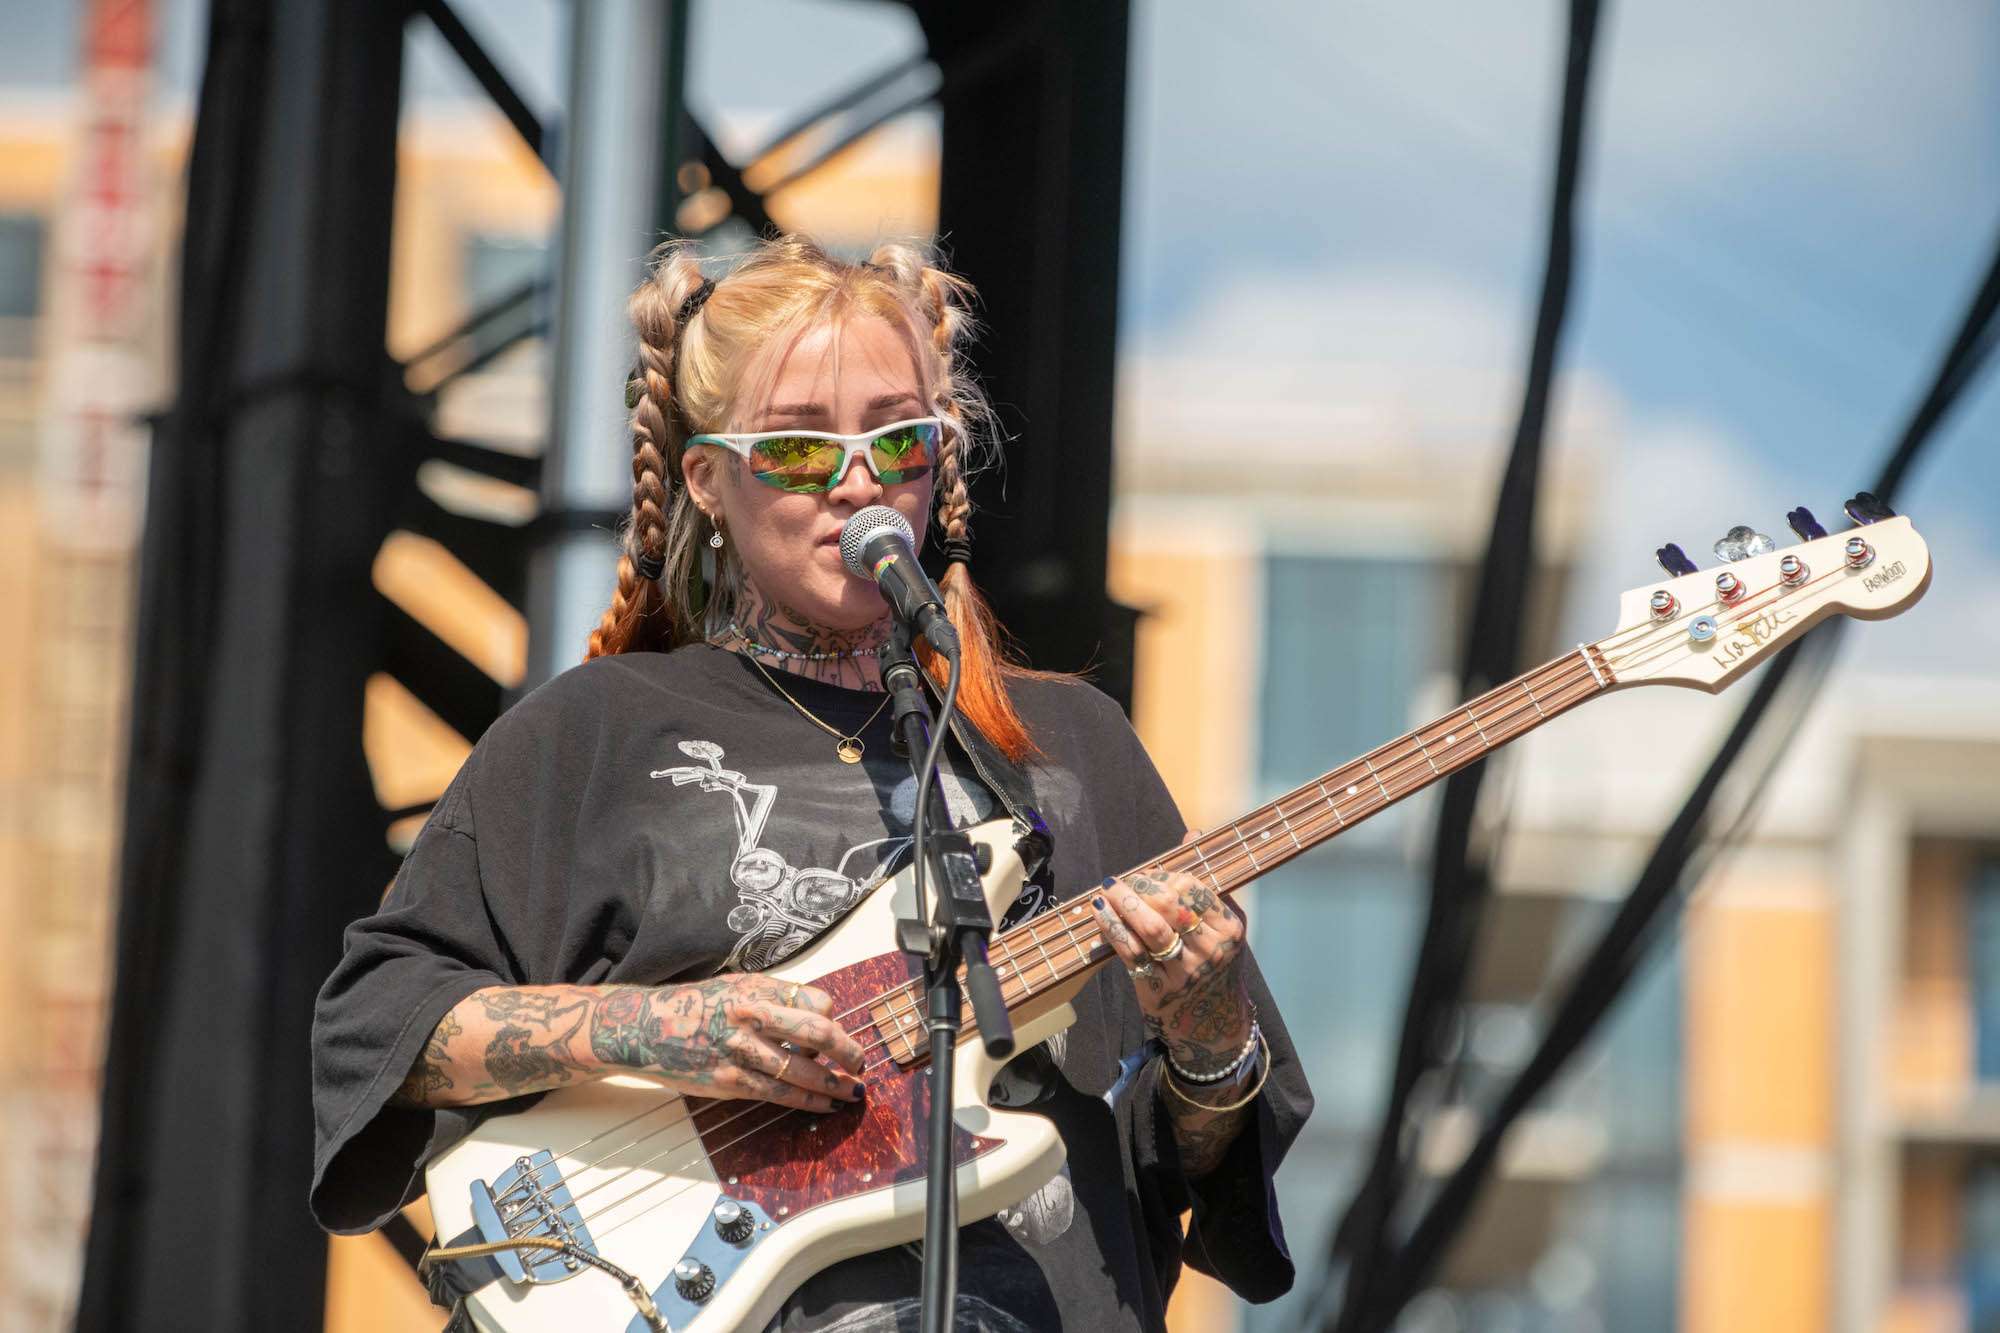 DEHD Live at Pitchfork [GALLERY] 9